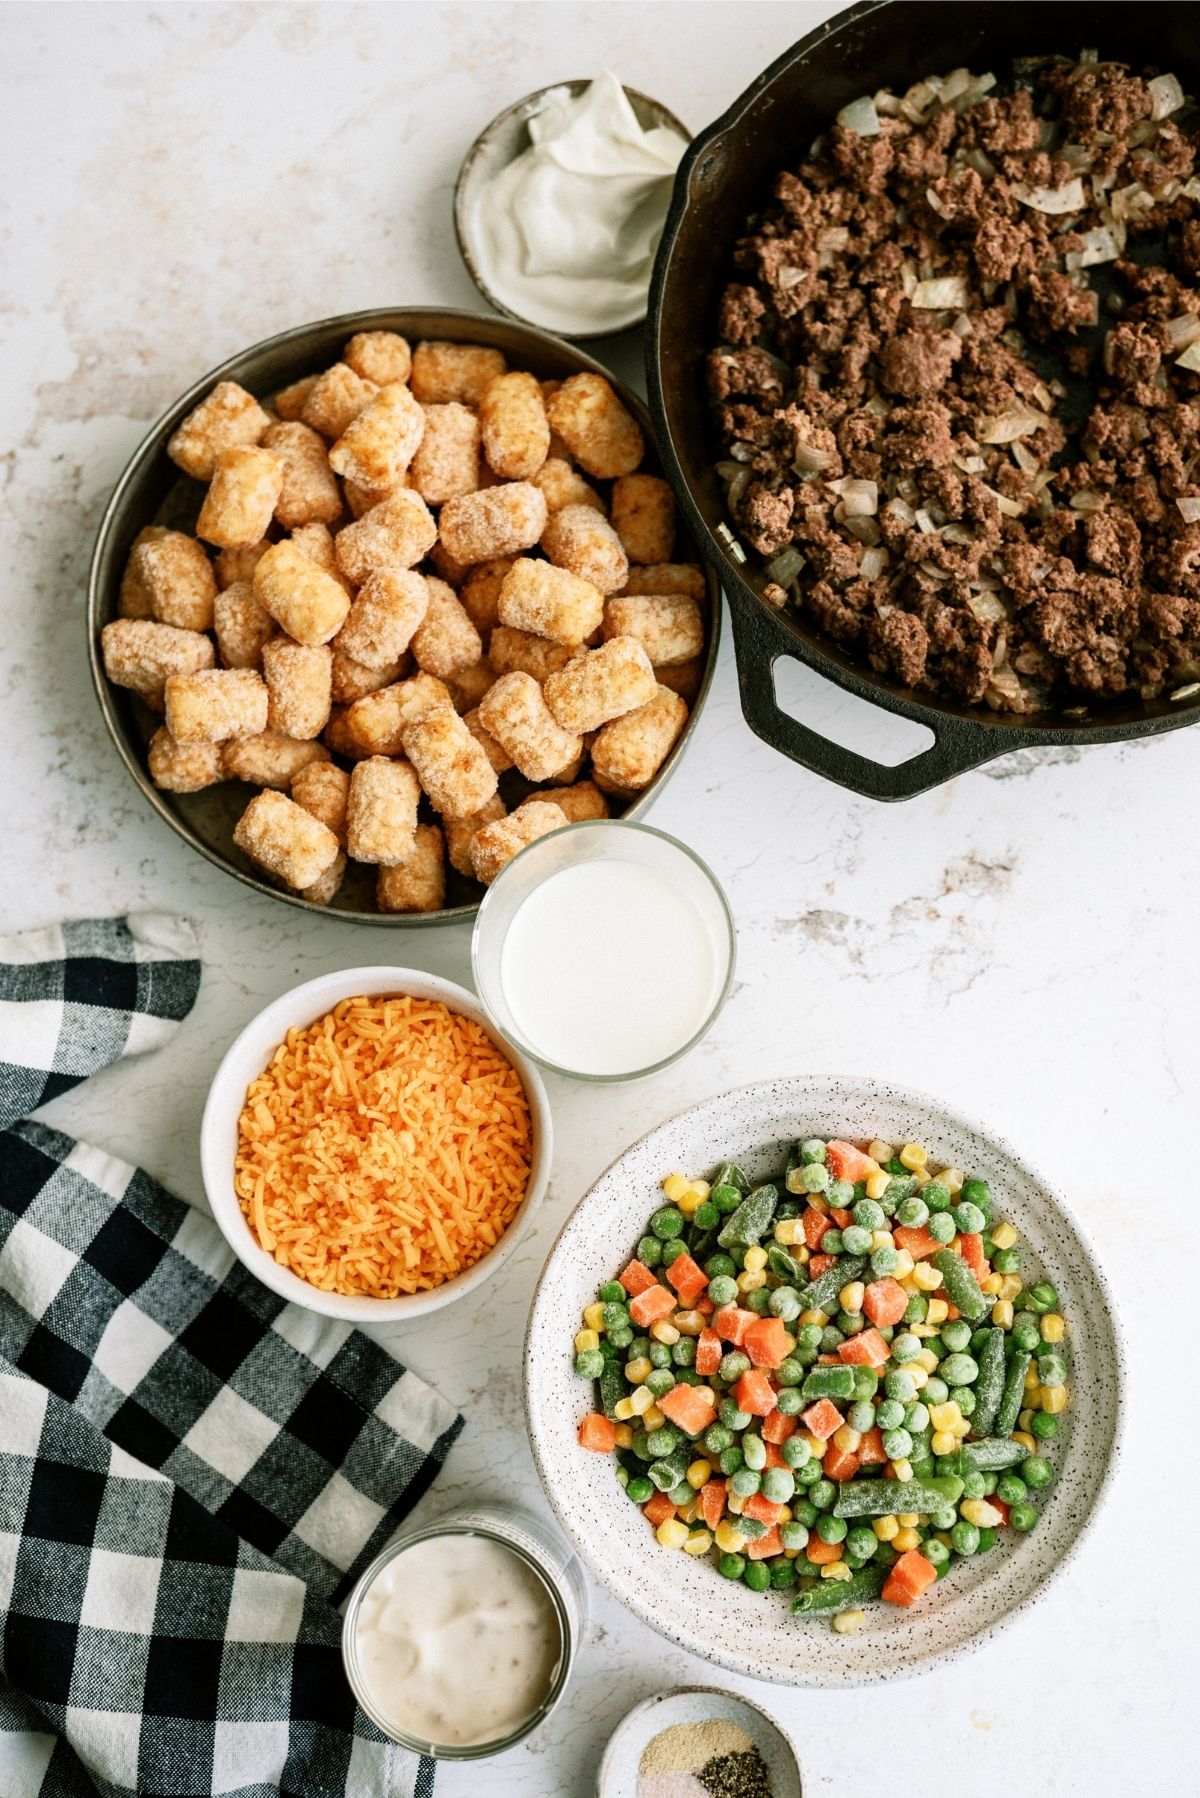 Ingredients for Slow Cooker Tater Tot Cowboy Casserole